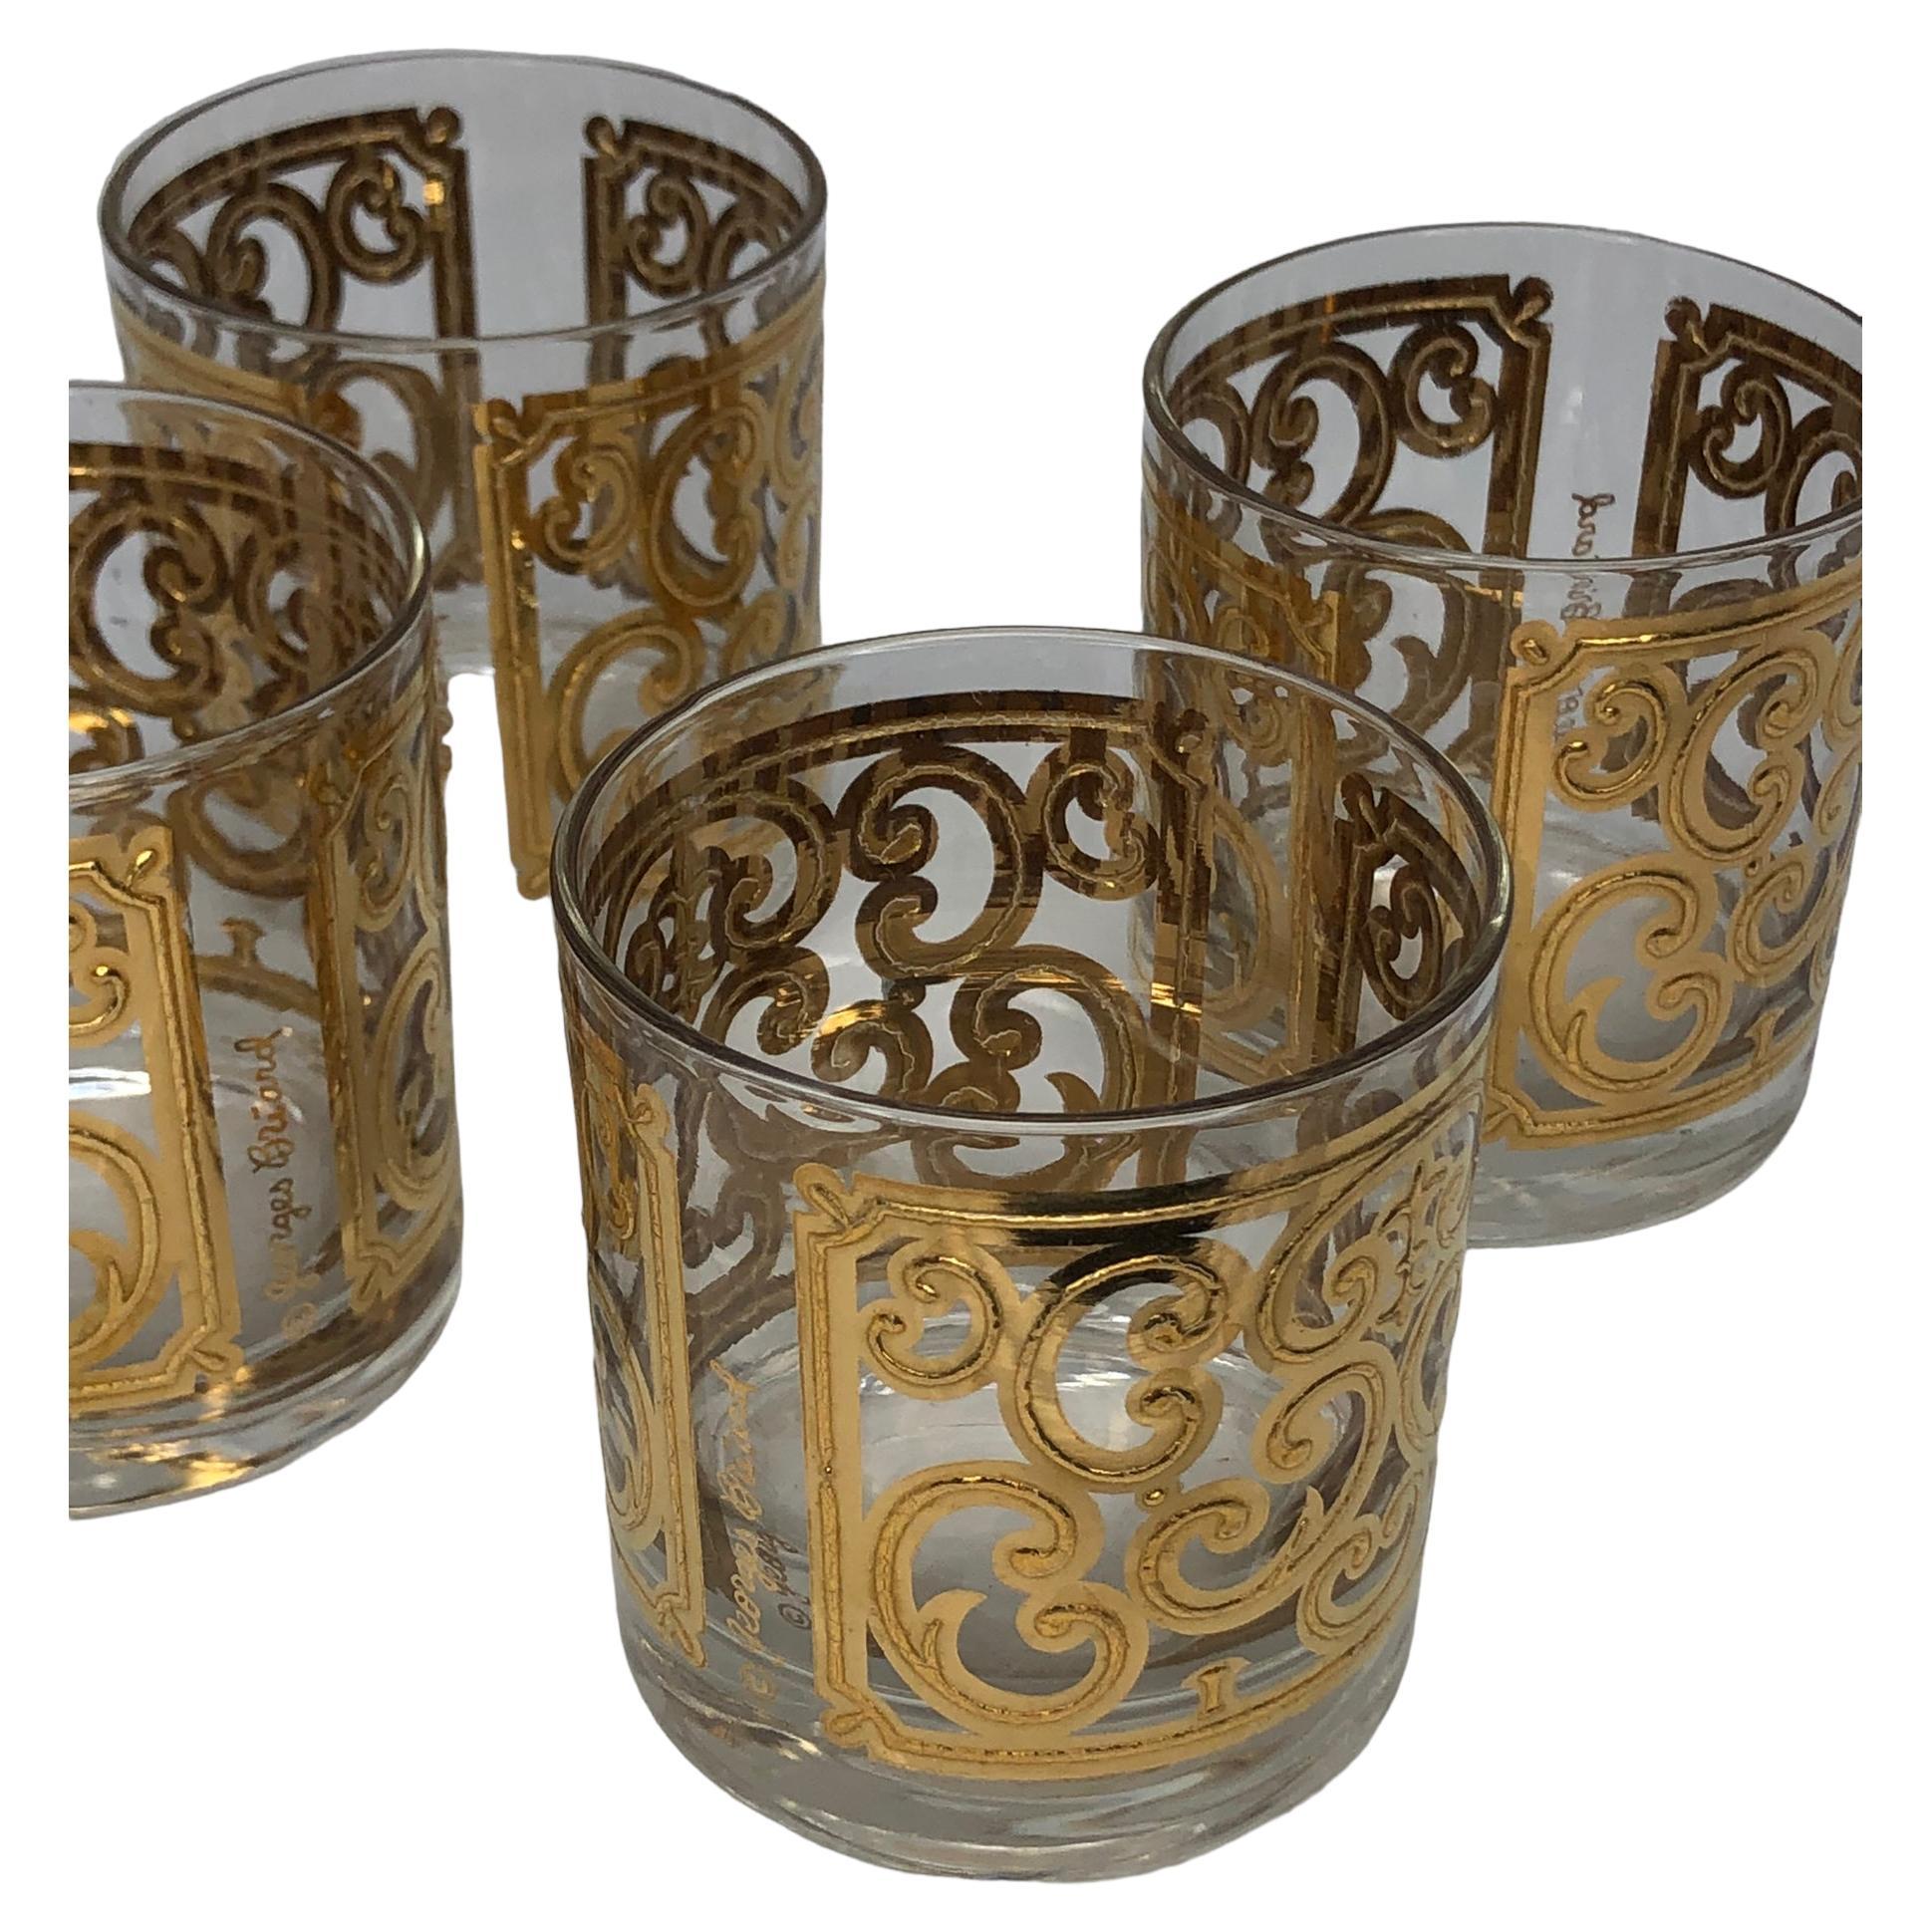 Set of Four Vintage Georges Briard Spanish Gold Rocks Glasses. Bold gold applied decoration in a scroll design. This is a rare pattern and hard to find. We have two sets of four available and are both listed.